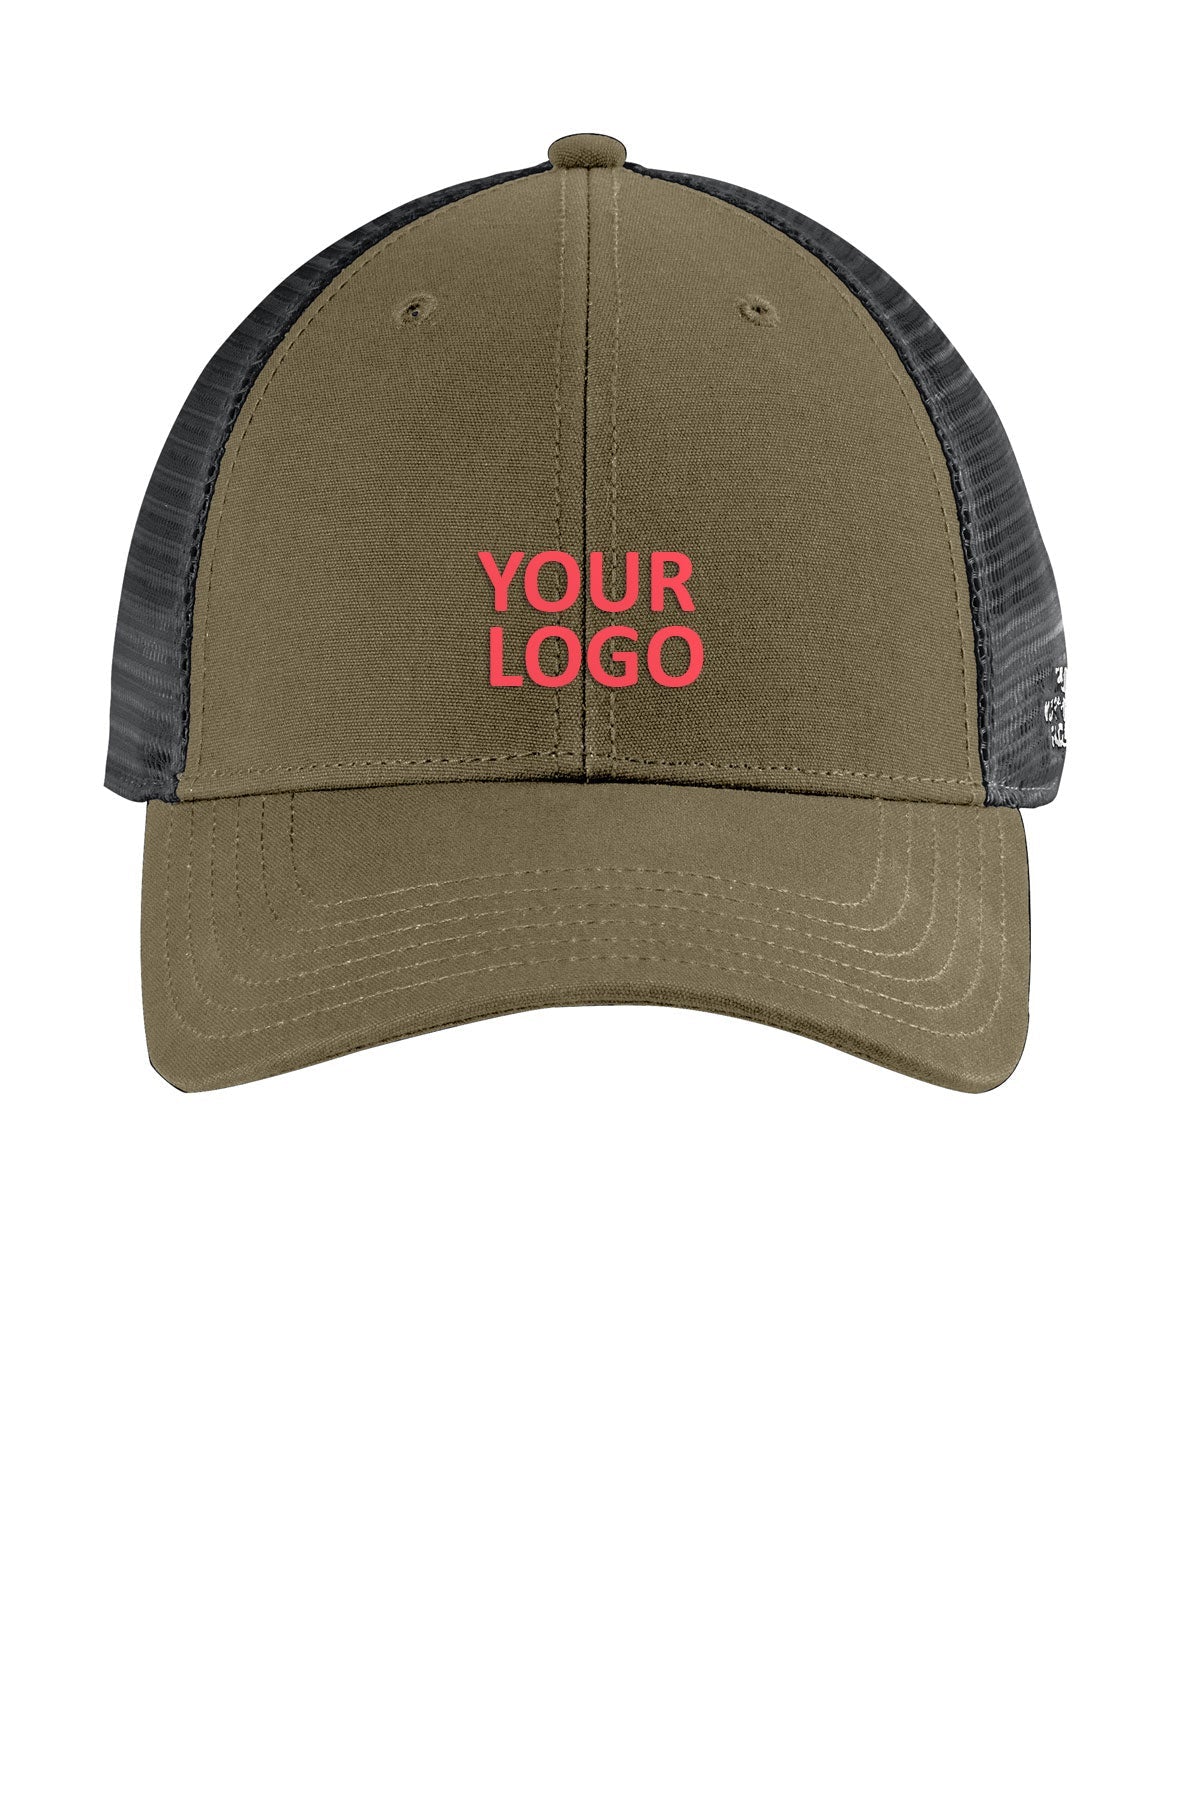 The North Face Burnt Olive Green/ Asphalt Grey NF0A4VUA The-North-Face-Ultimate-Trucker-Cap-NF0A4VUA-Burnt-Olive-Green-Asphalt-Grey